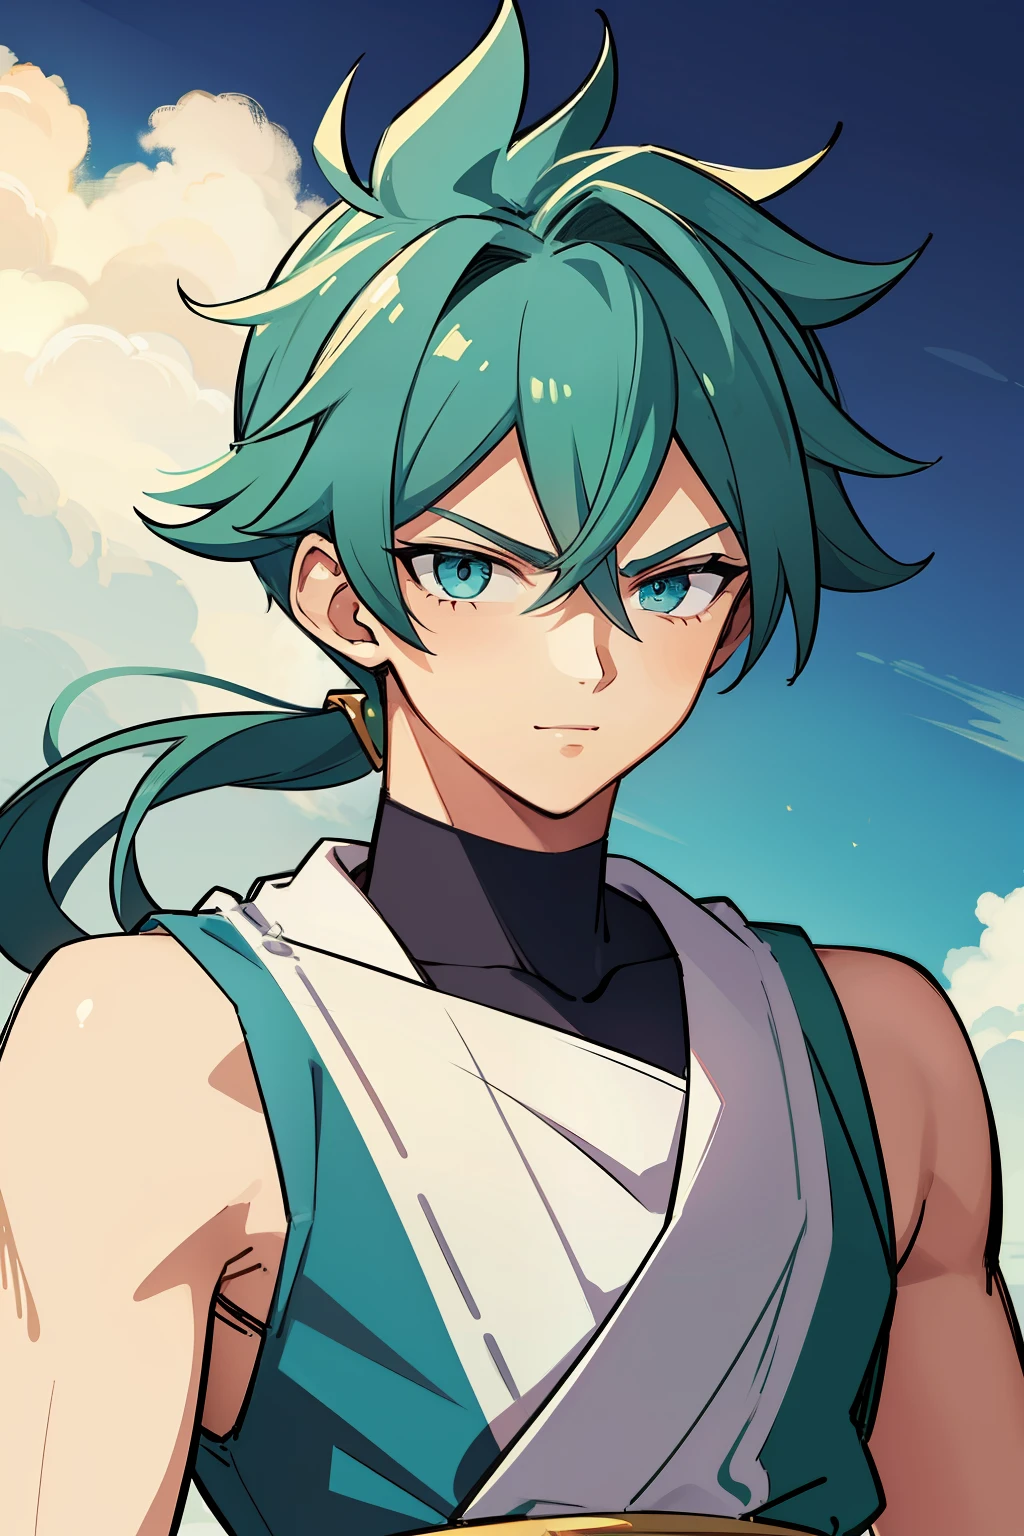 (high-quality, breathtaking),(expressive eyes, perfect face) 1boy, male, solo, young teen, medium blue hair, green coloured eyes, stylised hair, gentle smile, medium length hair, loose hair, side bangs, curley hair, really spiky hair, spiked up hair, ponytail, looking at viewer, portrait, ancient greek clothes, blue black and white tunic, white Chlamys, sleeveless, greek, blue and gold sash, ocean background, laurel accessory, slightly narrow eyes, masculine face, masculine eyes